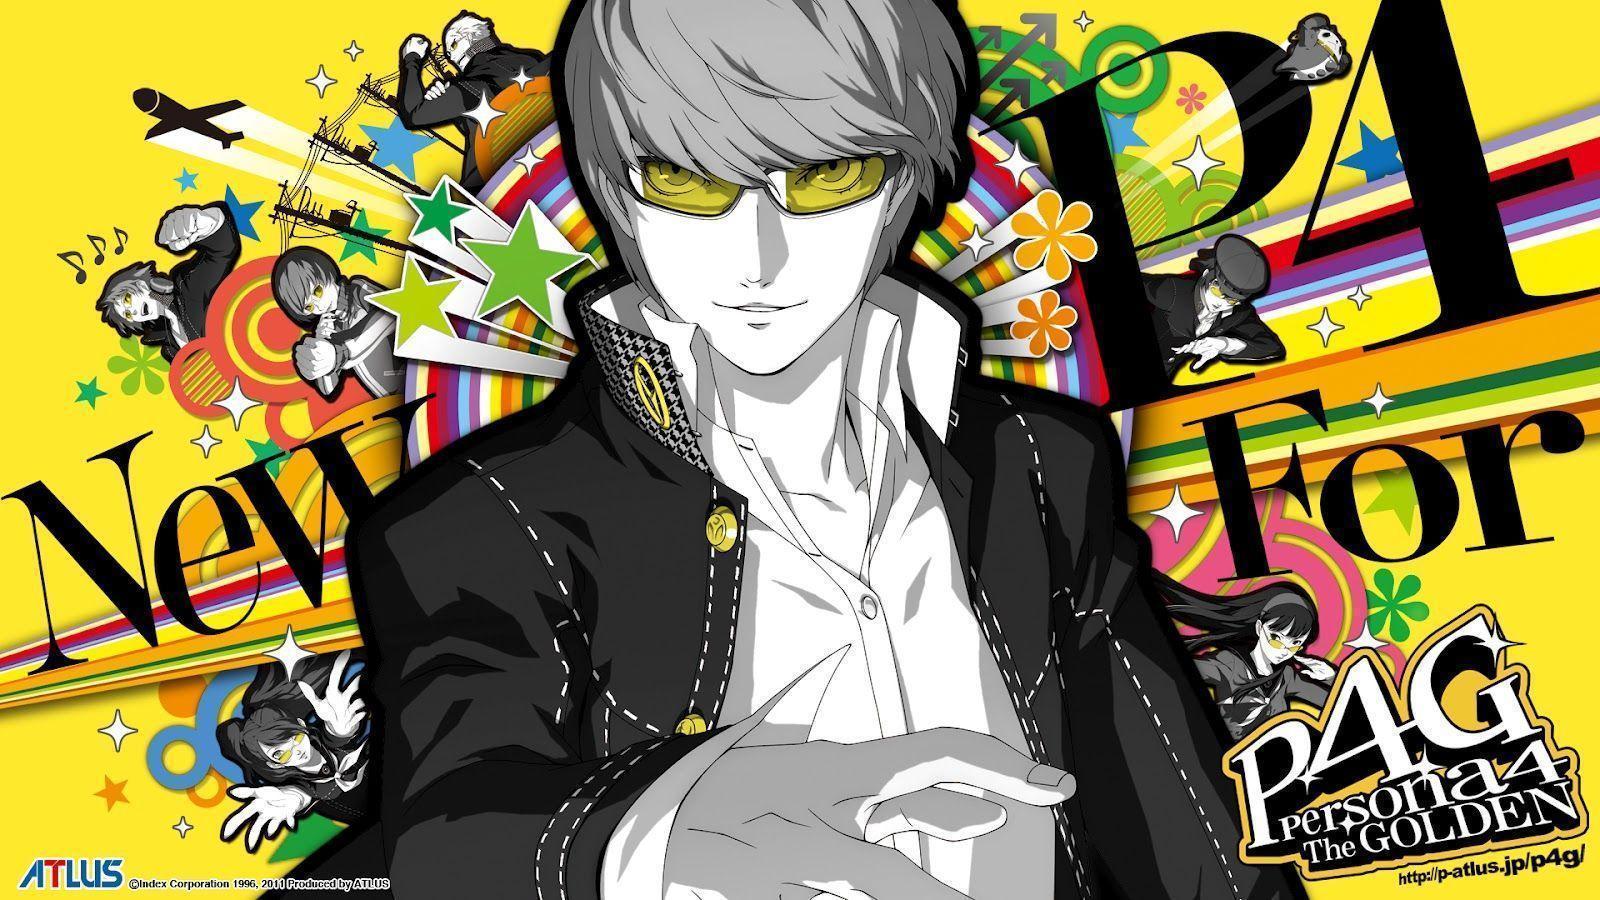 Wallpapers For > Persona 4 Arena Wallpapers Hd